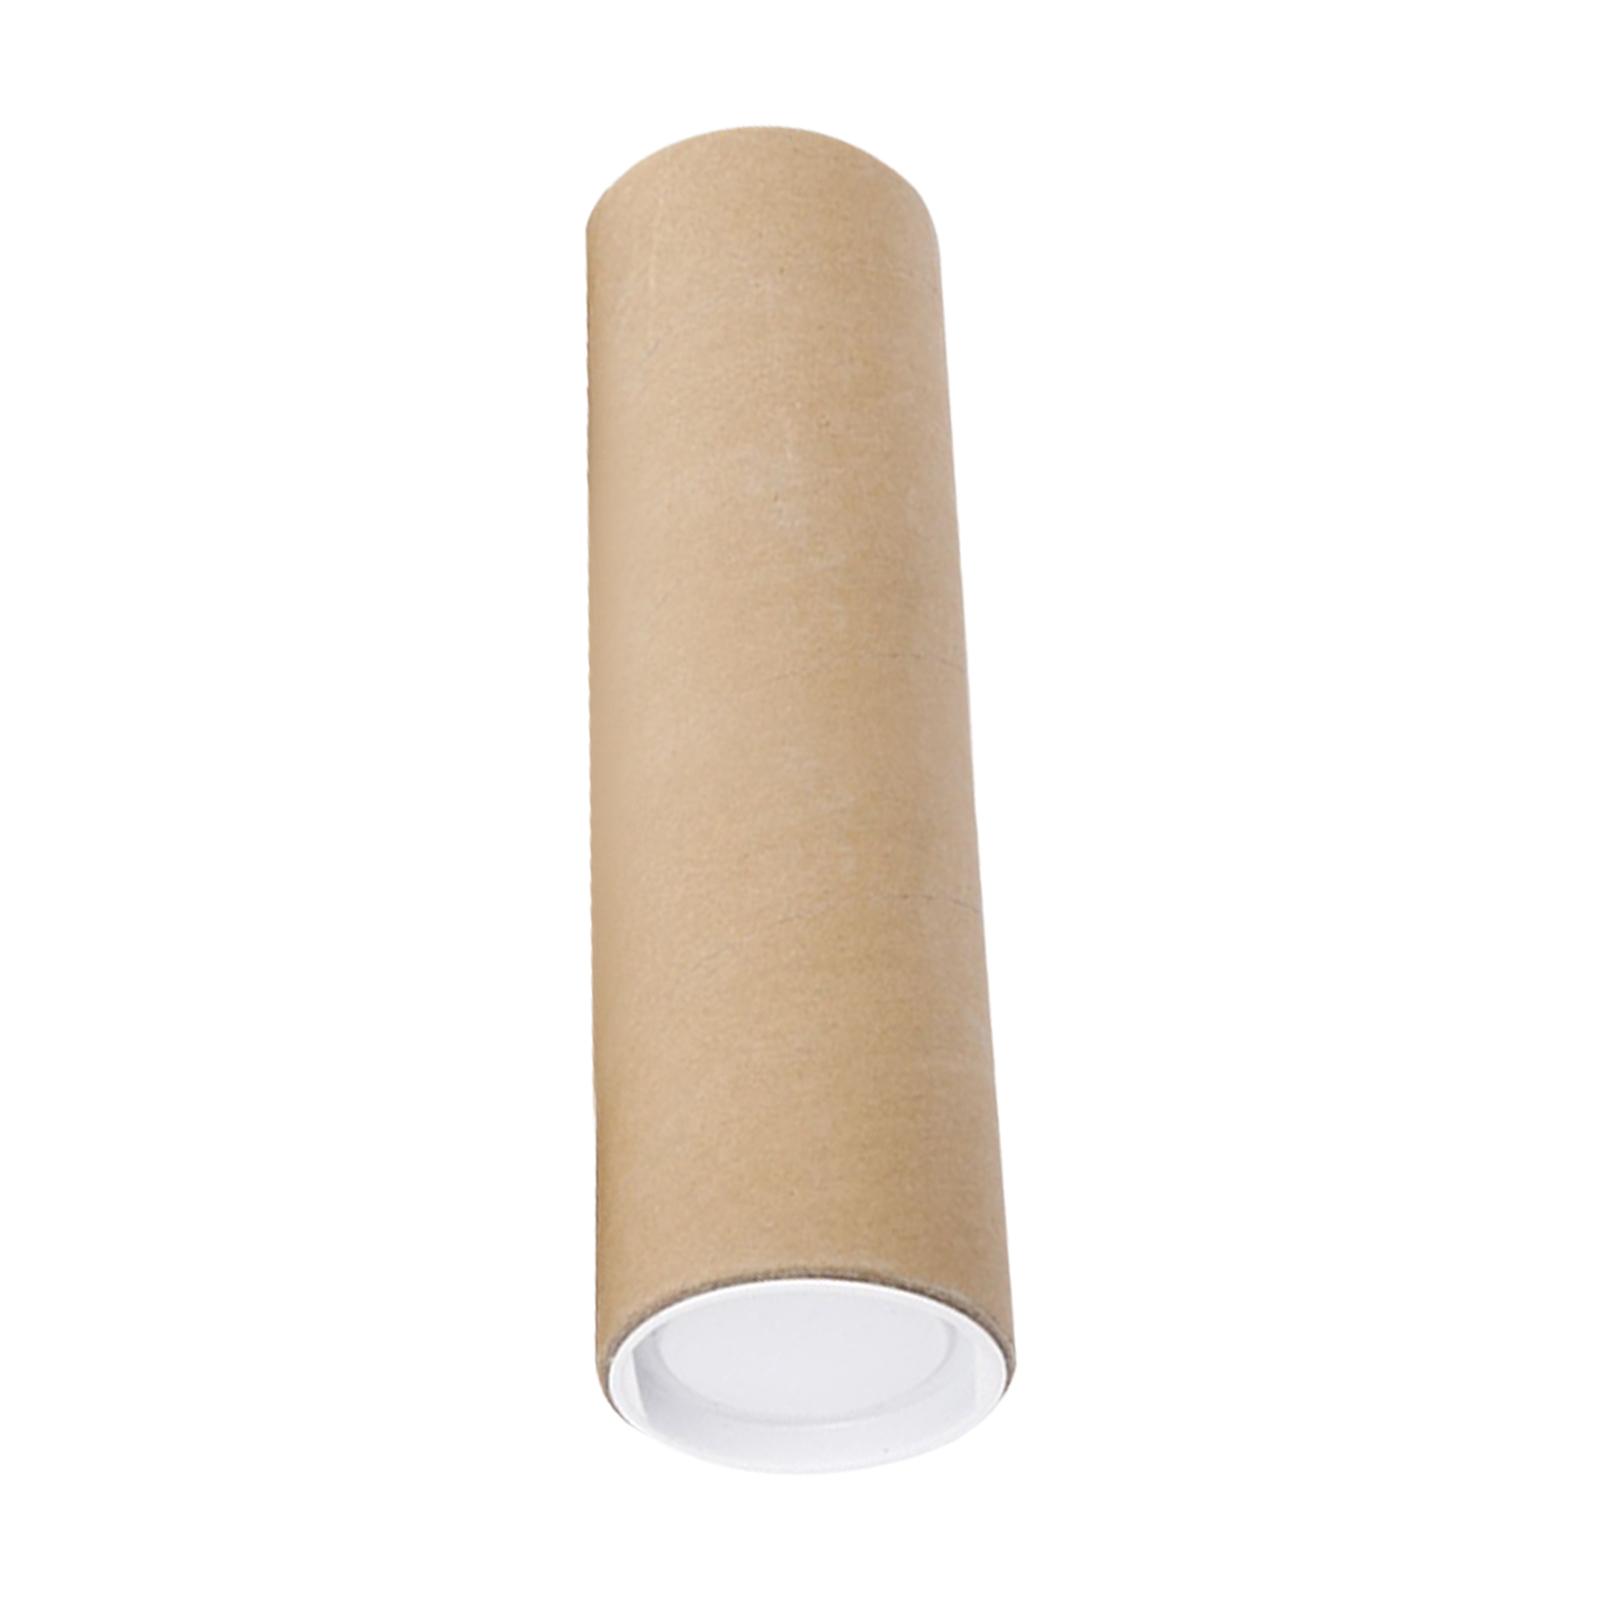 Thick Mailing Tubes with Caps Express Durable Packing Tubes Drawing Storage Tubes Poster Tube for Art Shipping Storage Container , 60cm, Size: 60 cm